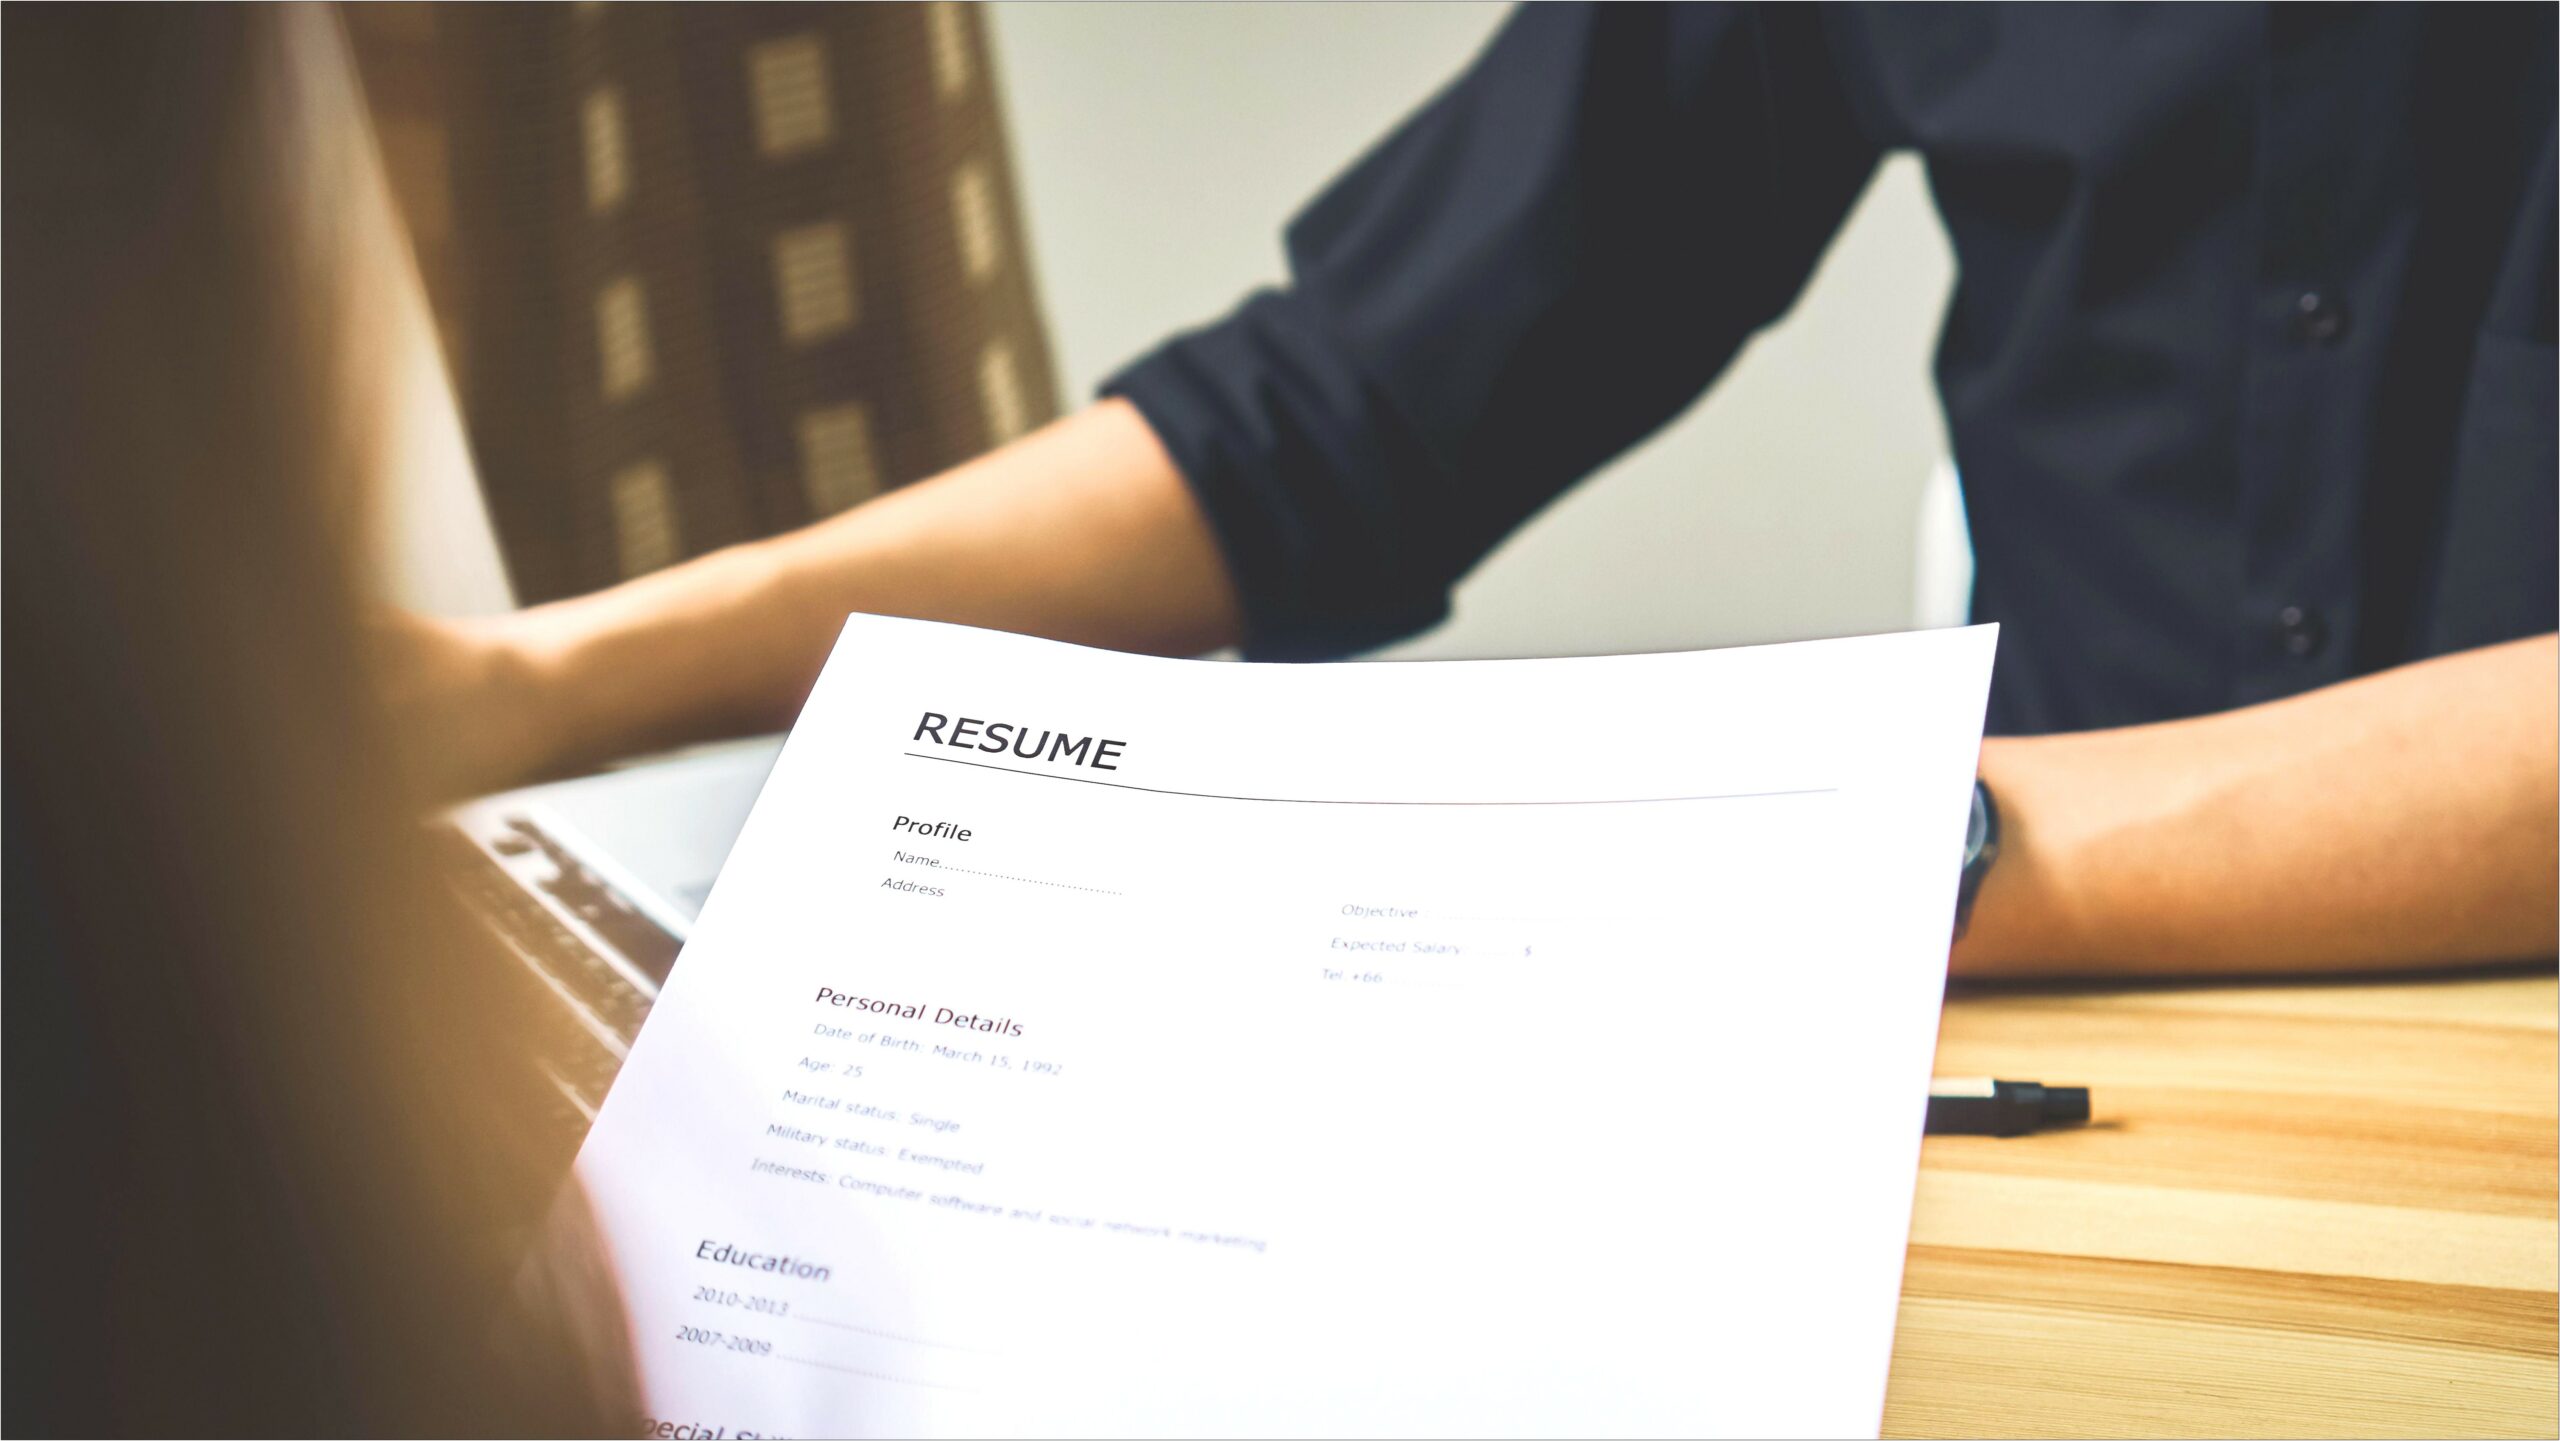 Work Experience Dates On Resume Accuracy